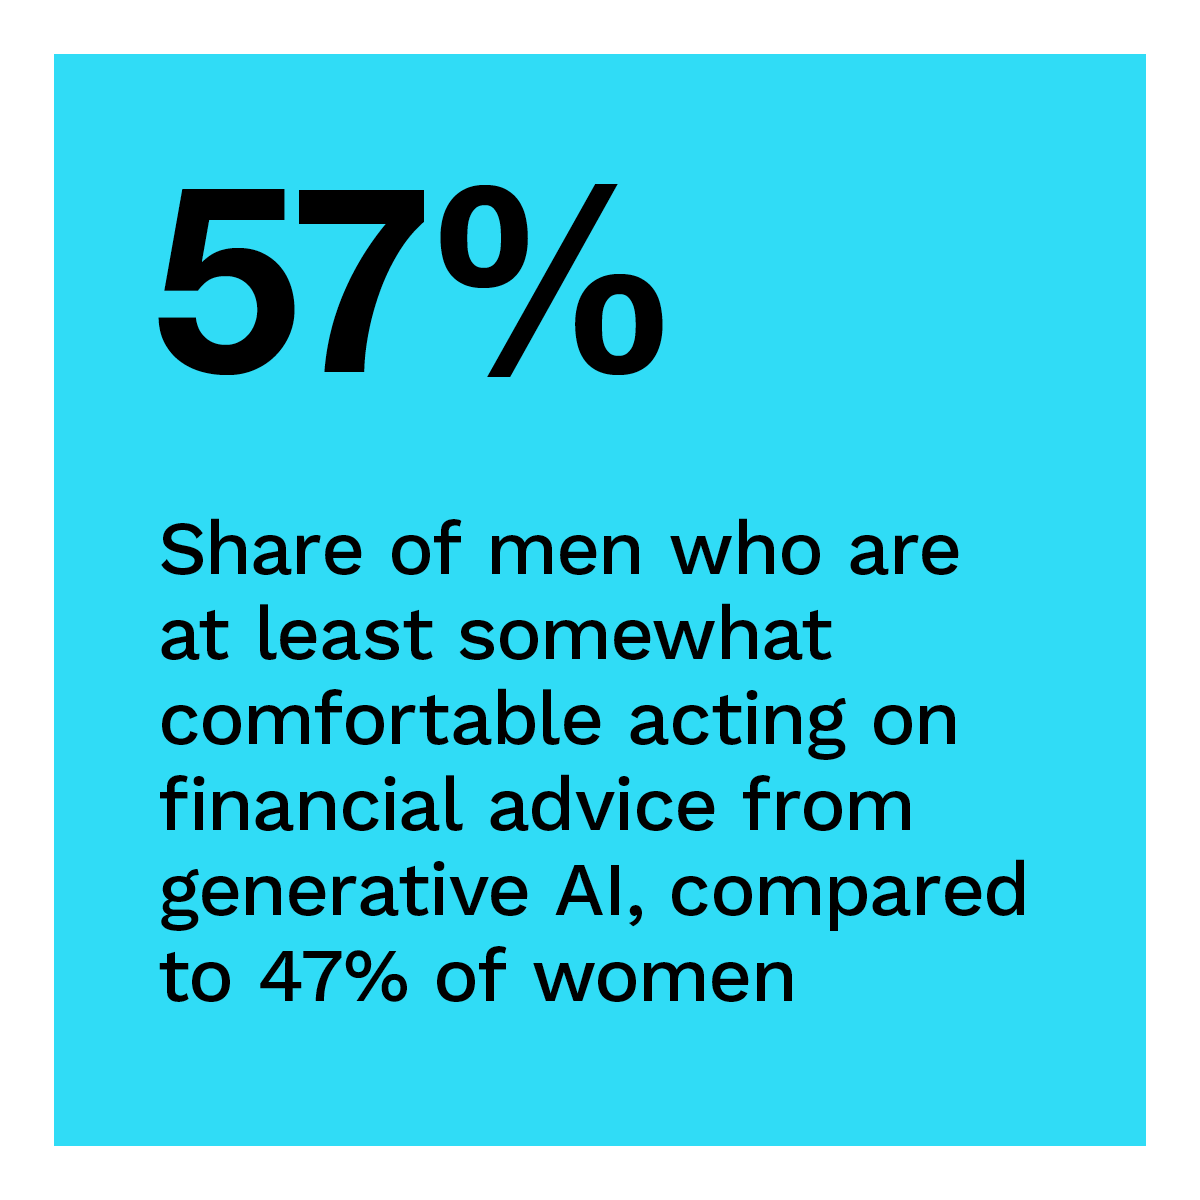 57%: Share of men who are at least somewhat comfortable acting on financial advice from generative AI, compared to 47% of women